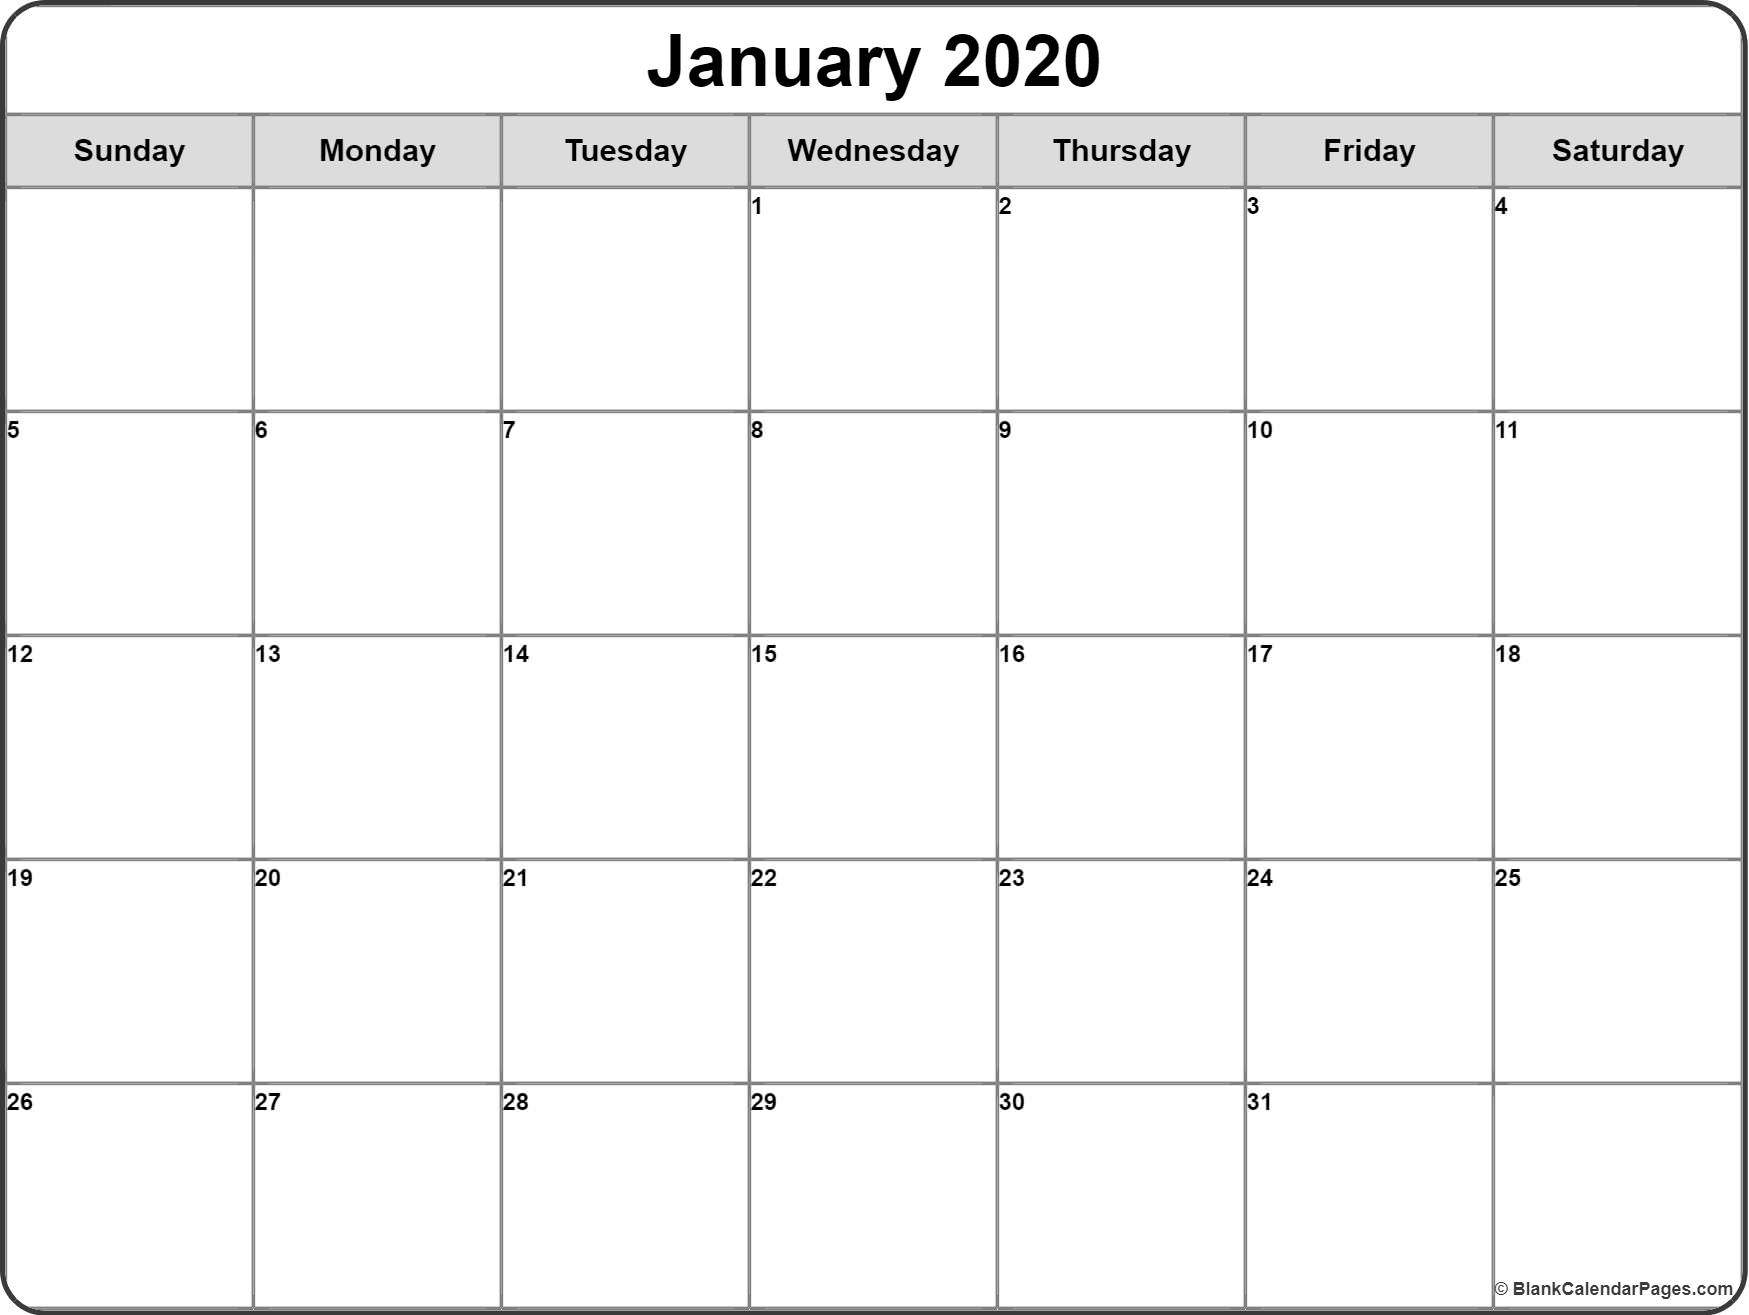 January 2020 Calendar | Free Printable Monthly Calendars in 2020 Free Printable Calendars Without Downloading Monthly